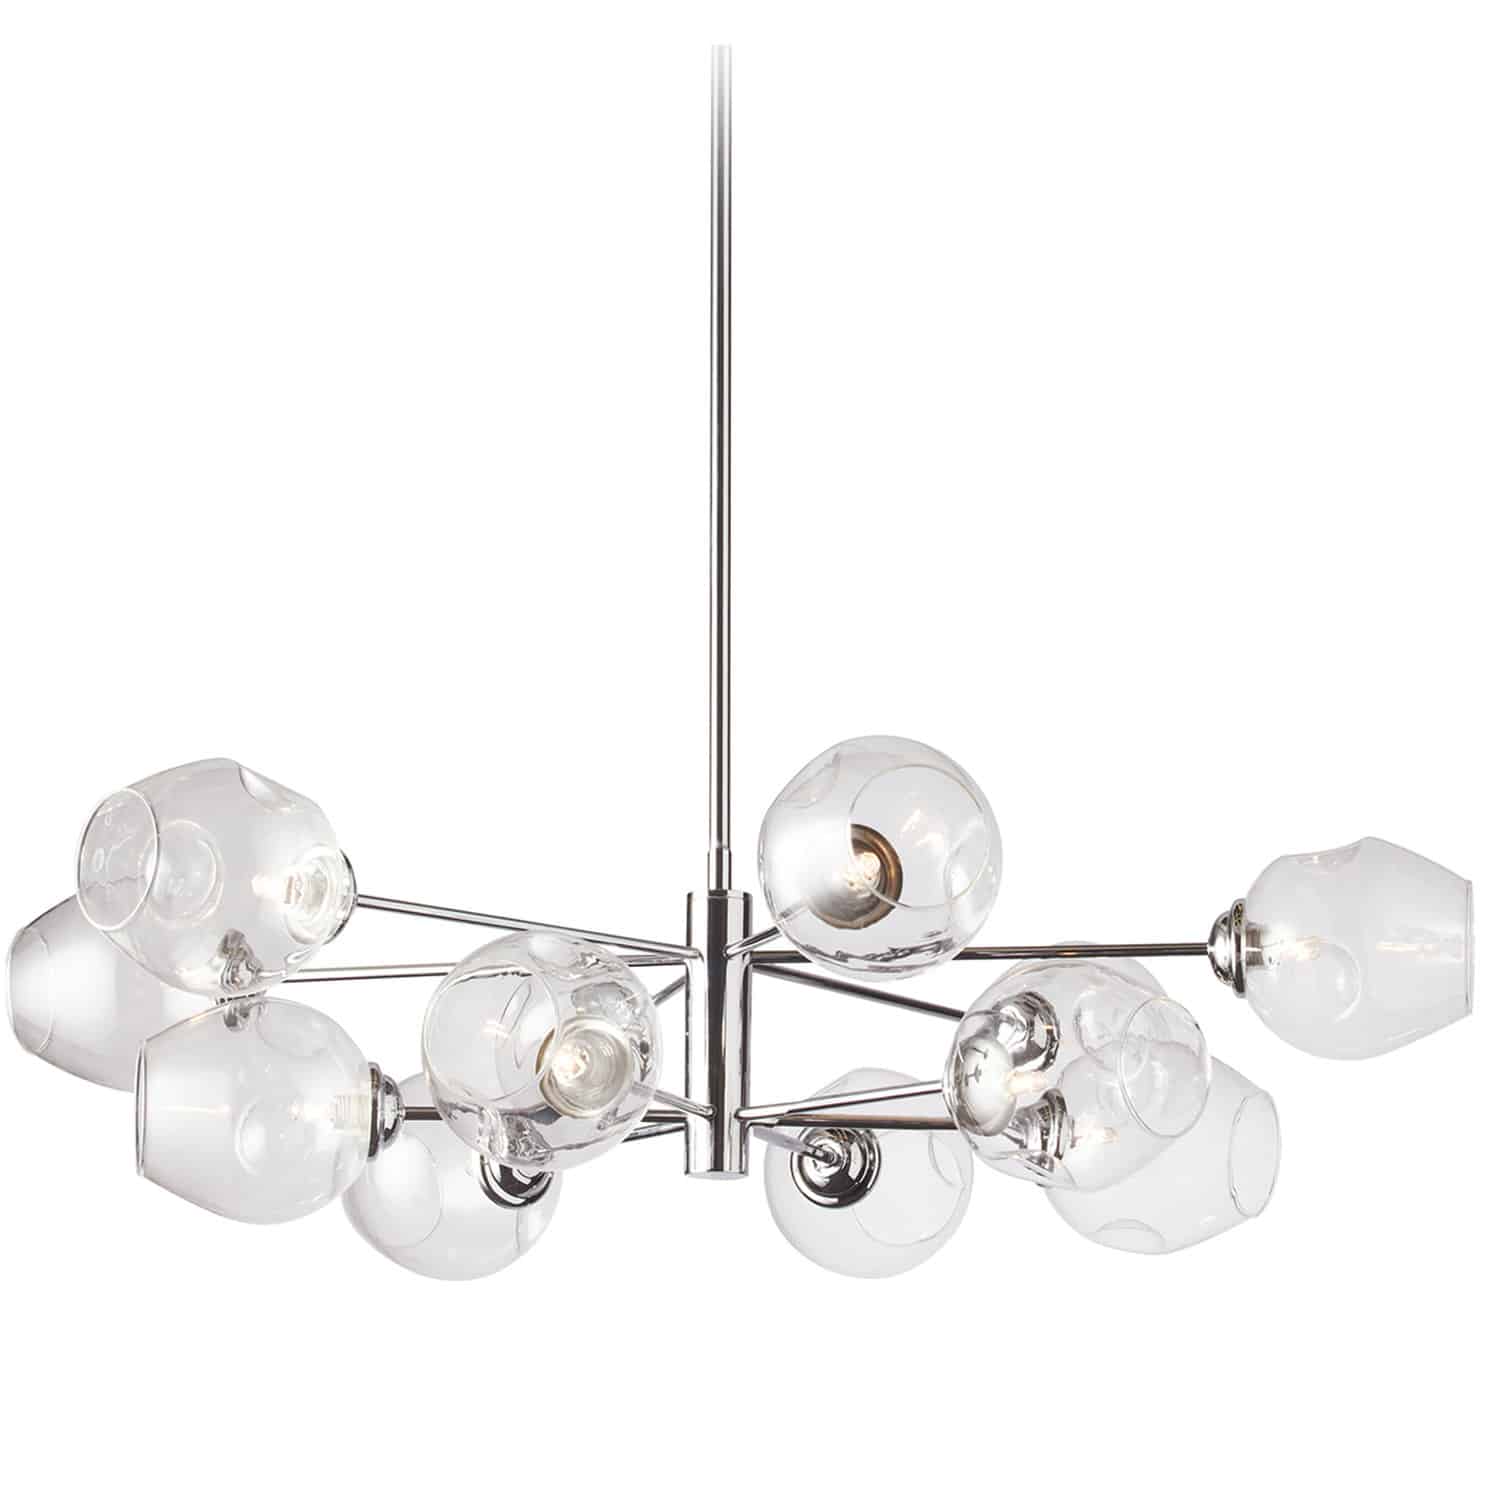 12 Light Round Pendant, Polished Chrome Finish with Clear Glass